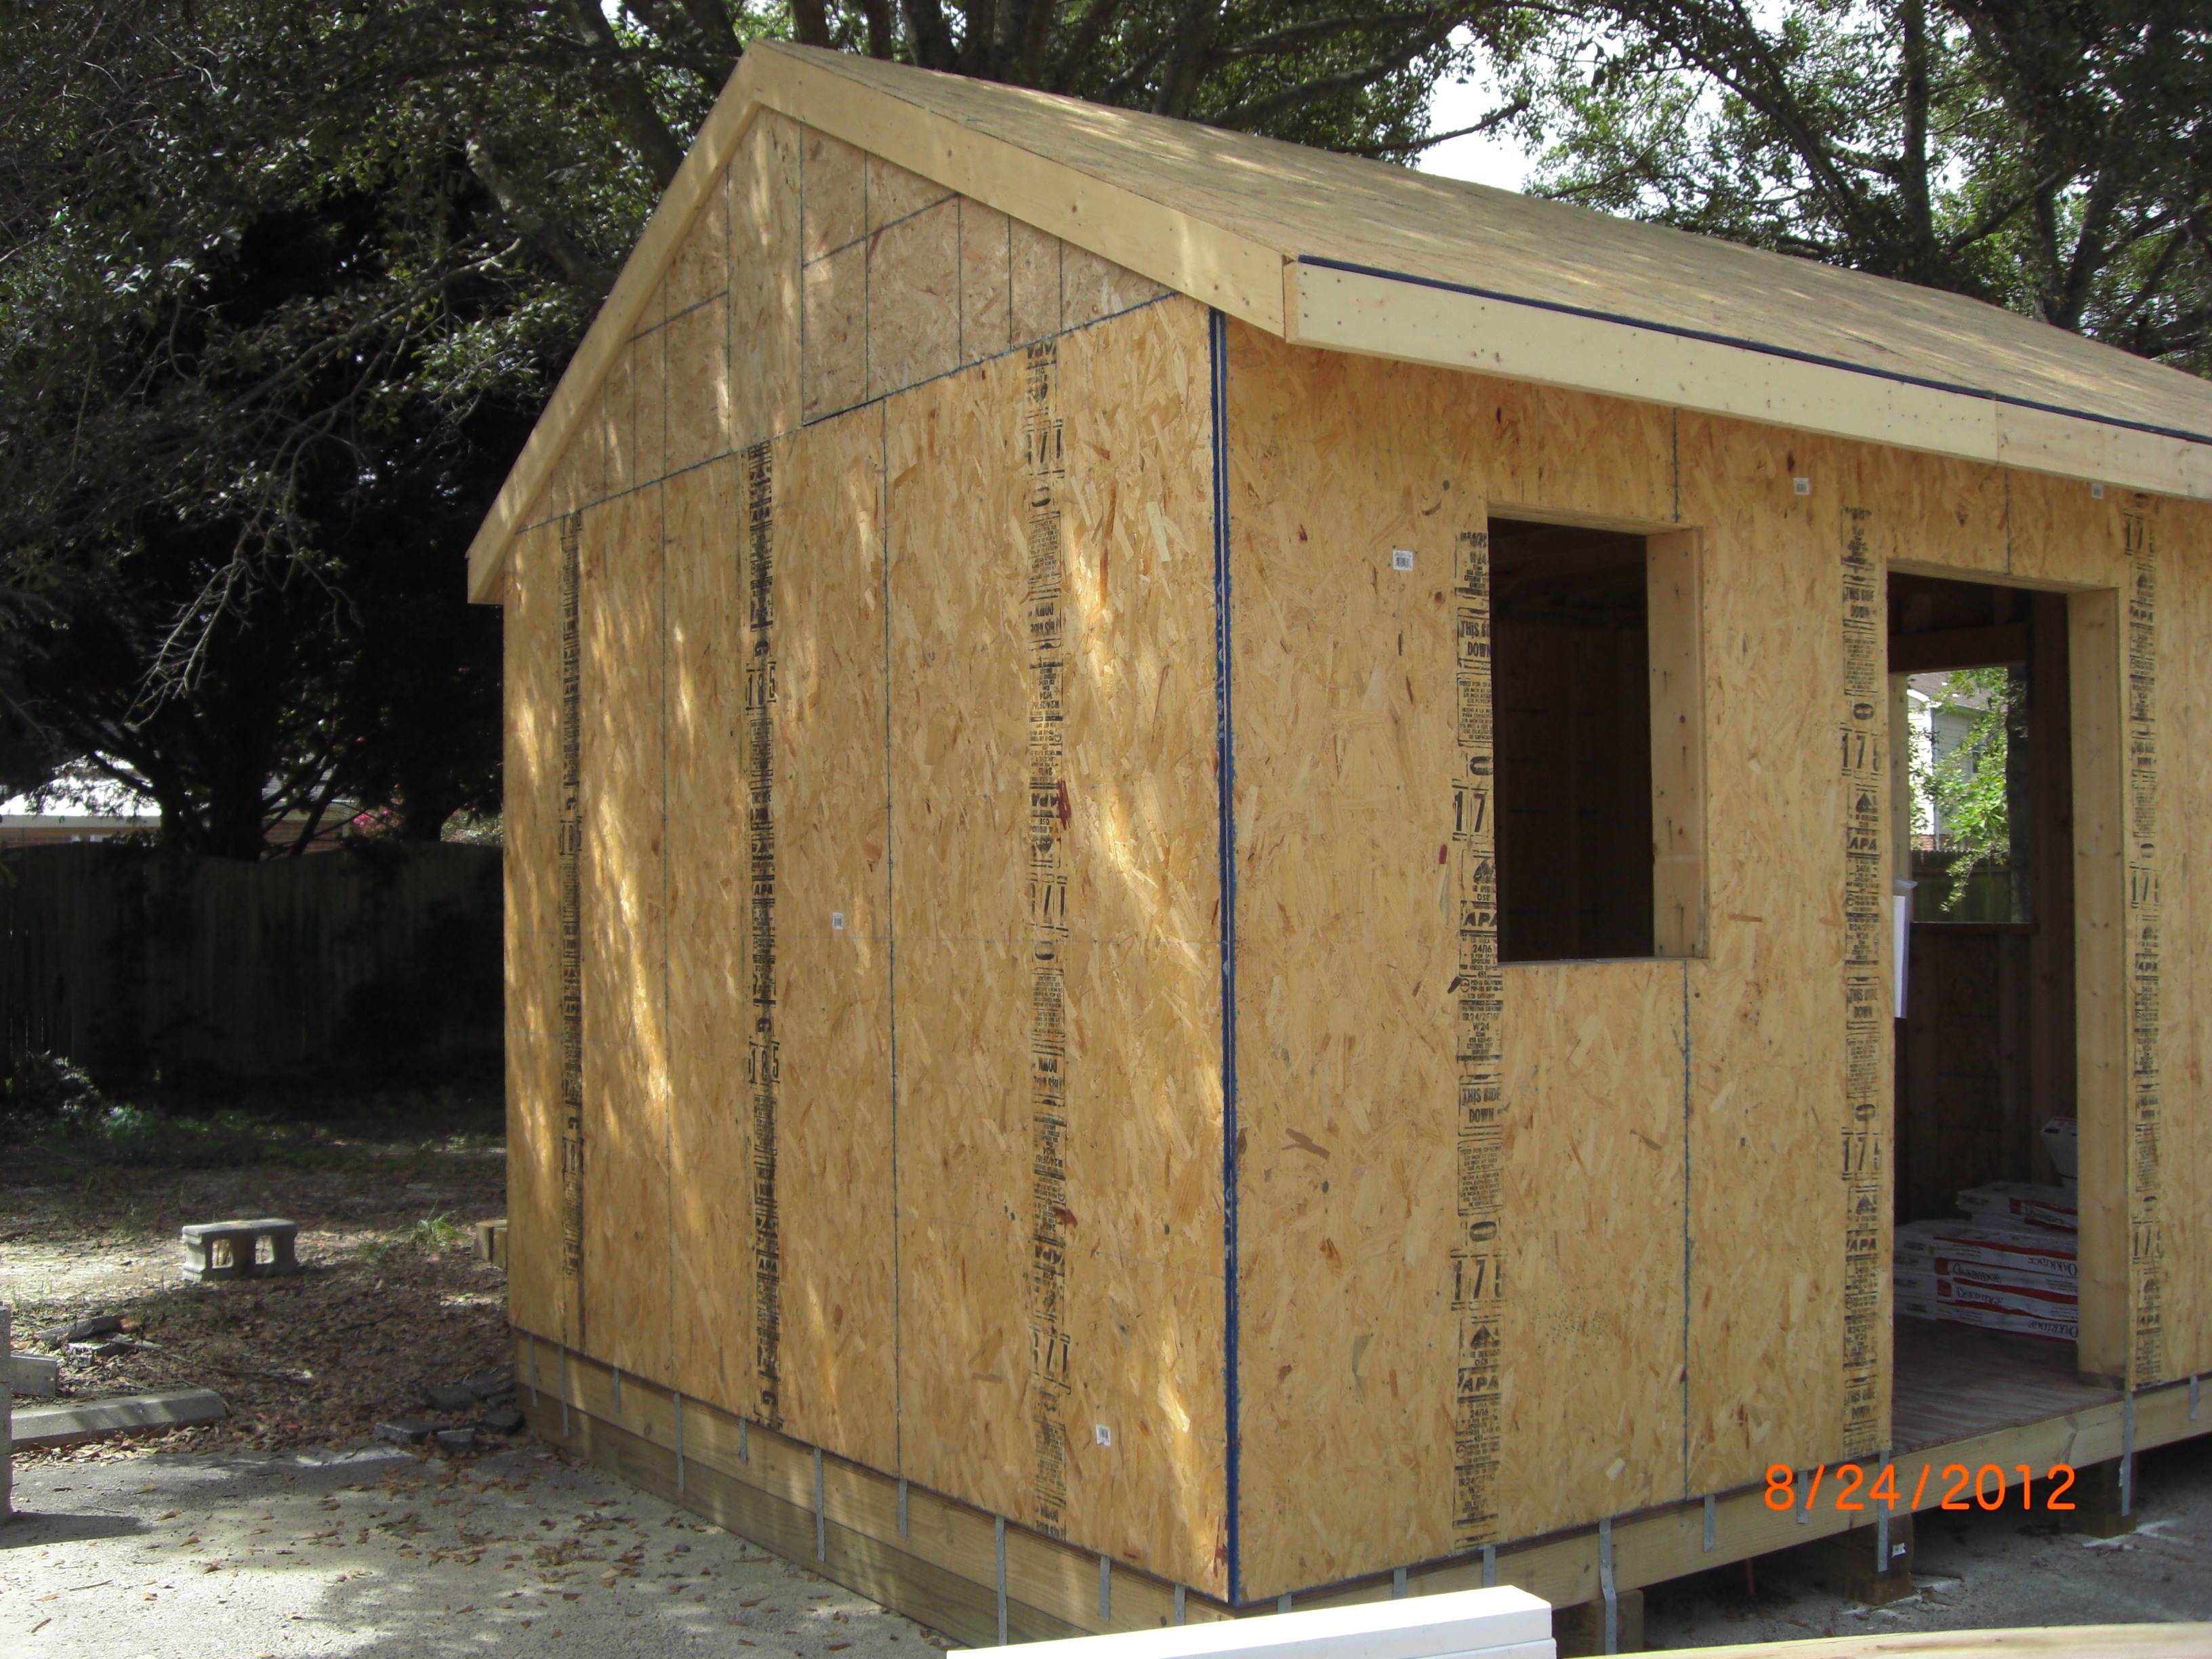  16â€³ oriented strand board (OSB) and is used for the walls and roof